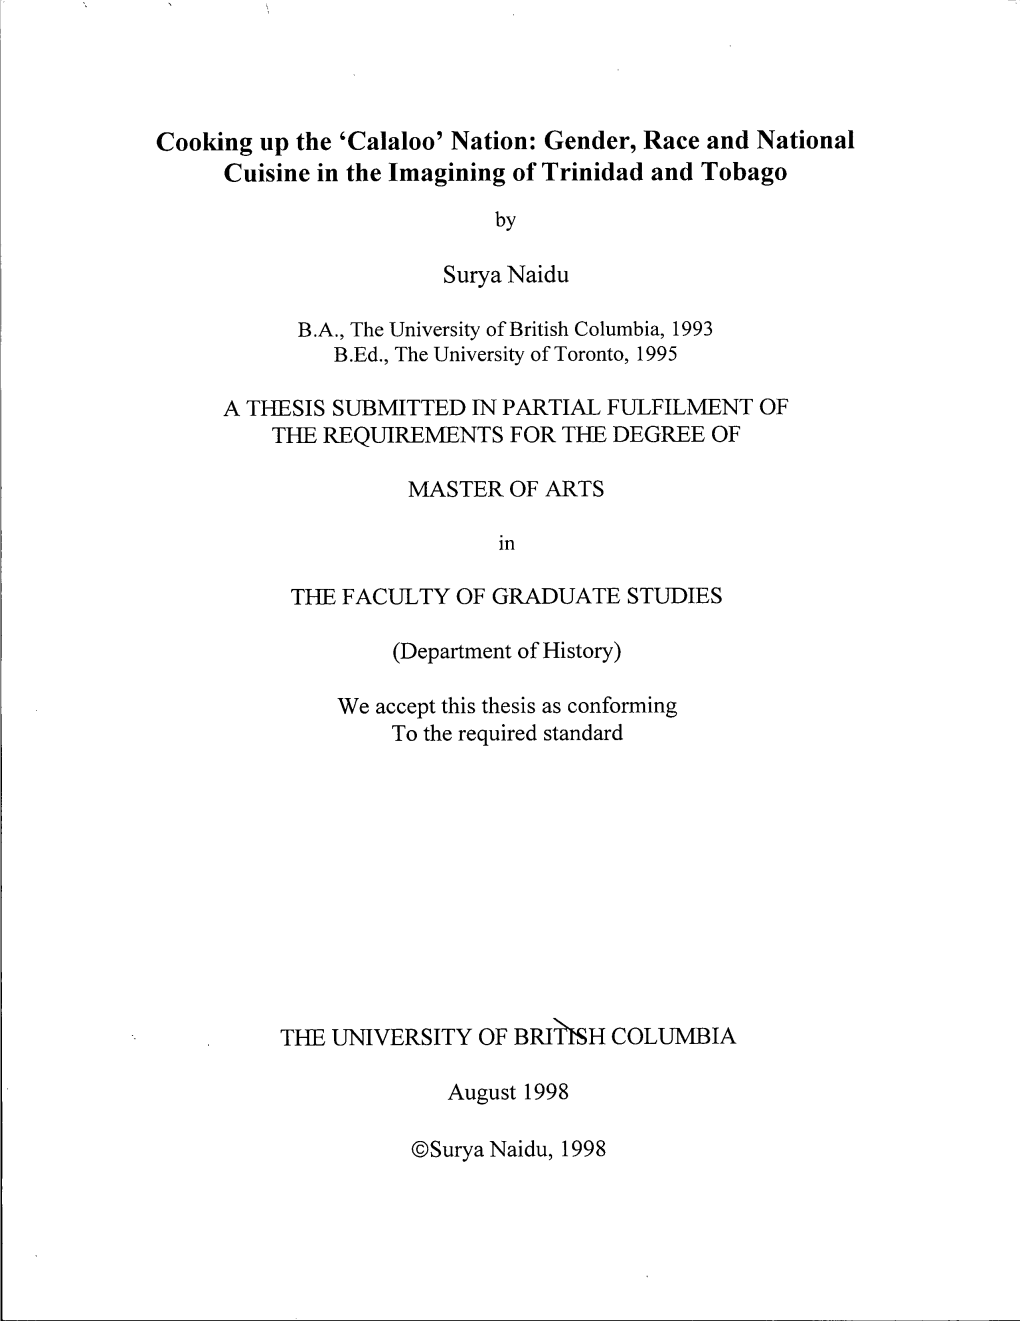 Cooking up the 'Calaloo' Nation: Gender, Race and National Cuisine in the Imagining of Trinidad and Tobago